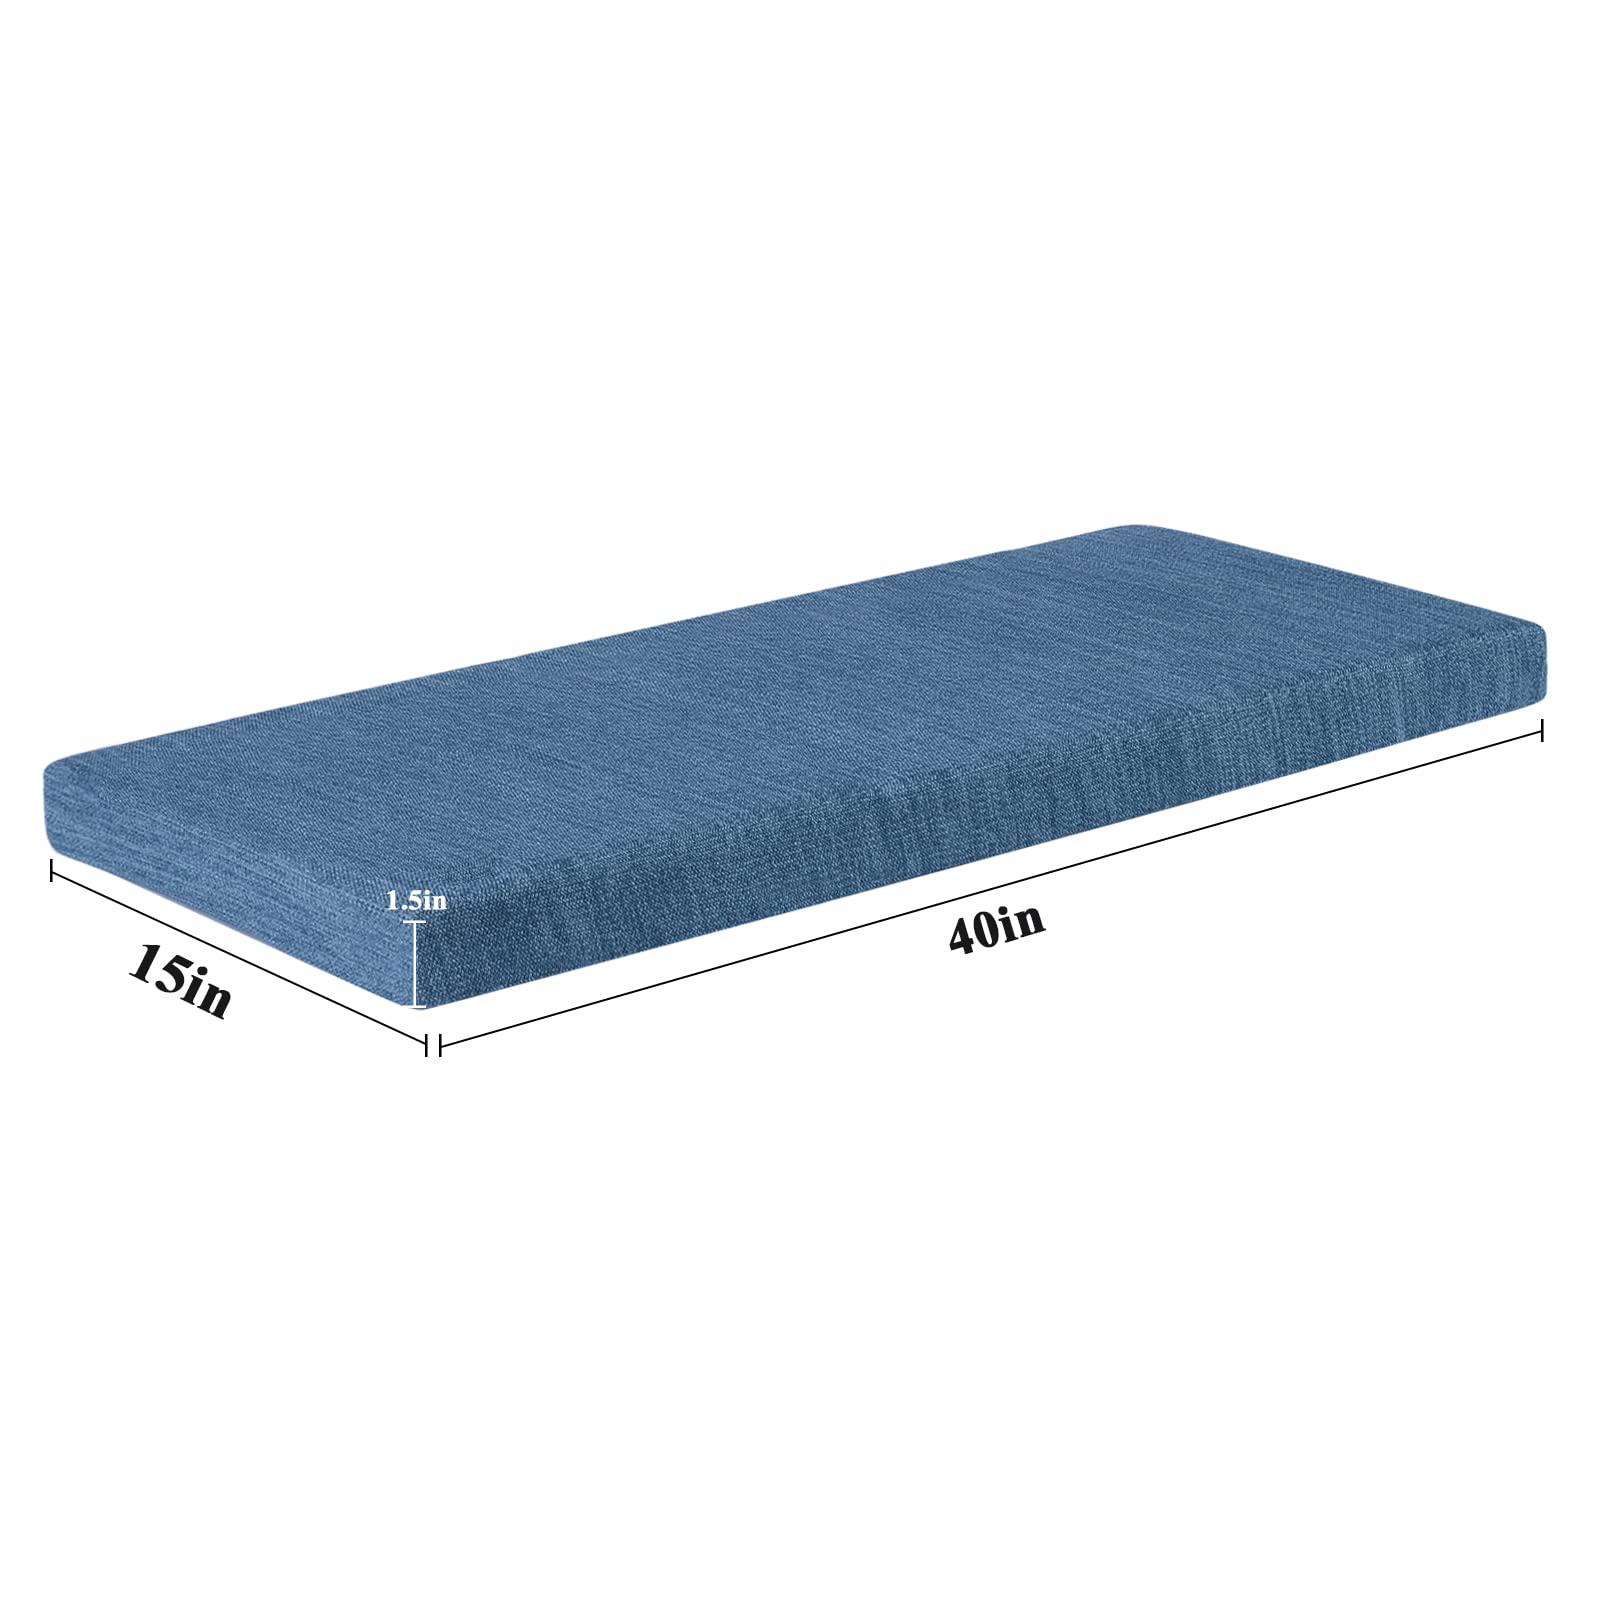 baibu 40 Inch Metal Bench Cushion with Ties, Non-Slip Rectangle Bench Seat Cushion Kitchen Bench Cushion with Machine Washable Cover - One Pad Only (Light Blue, 40x15x1.5in)